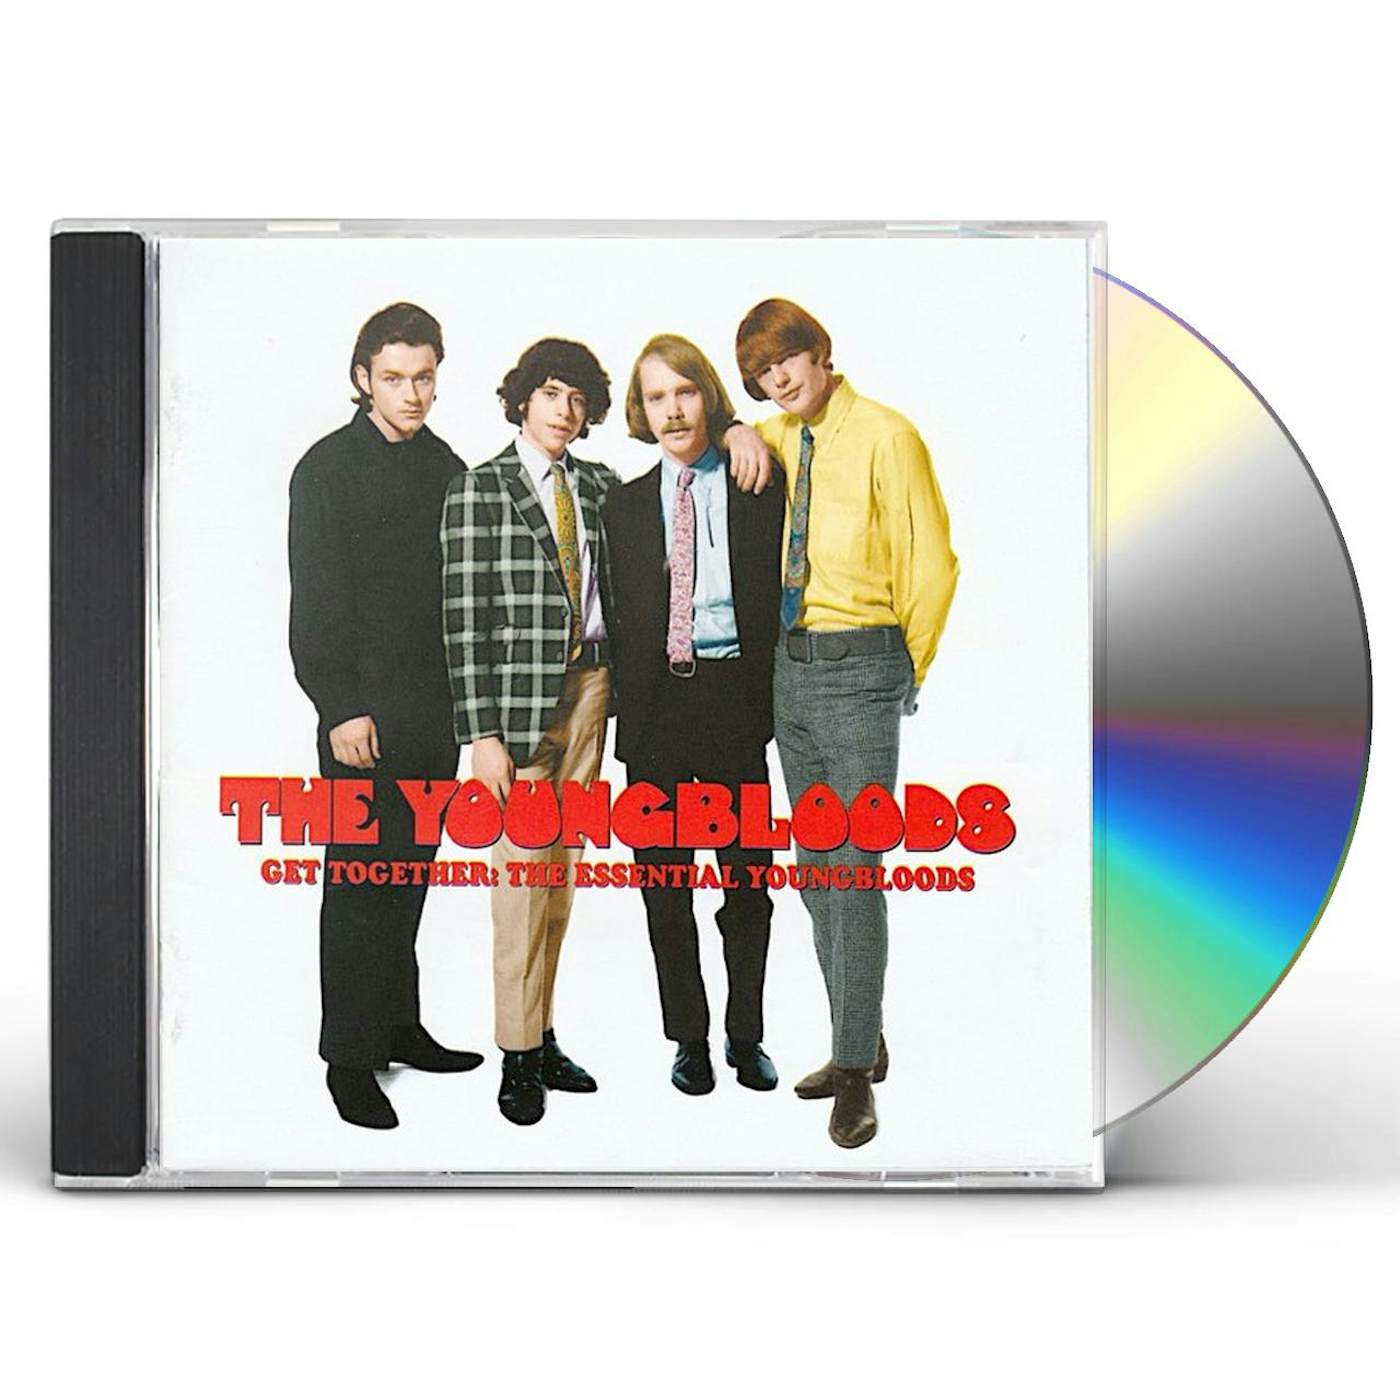 GET TOGETHER: ESSENTIAL The Youngbloods CD